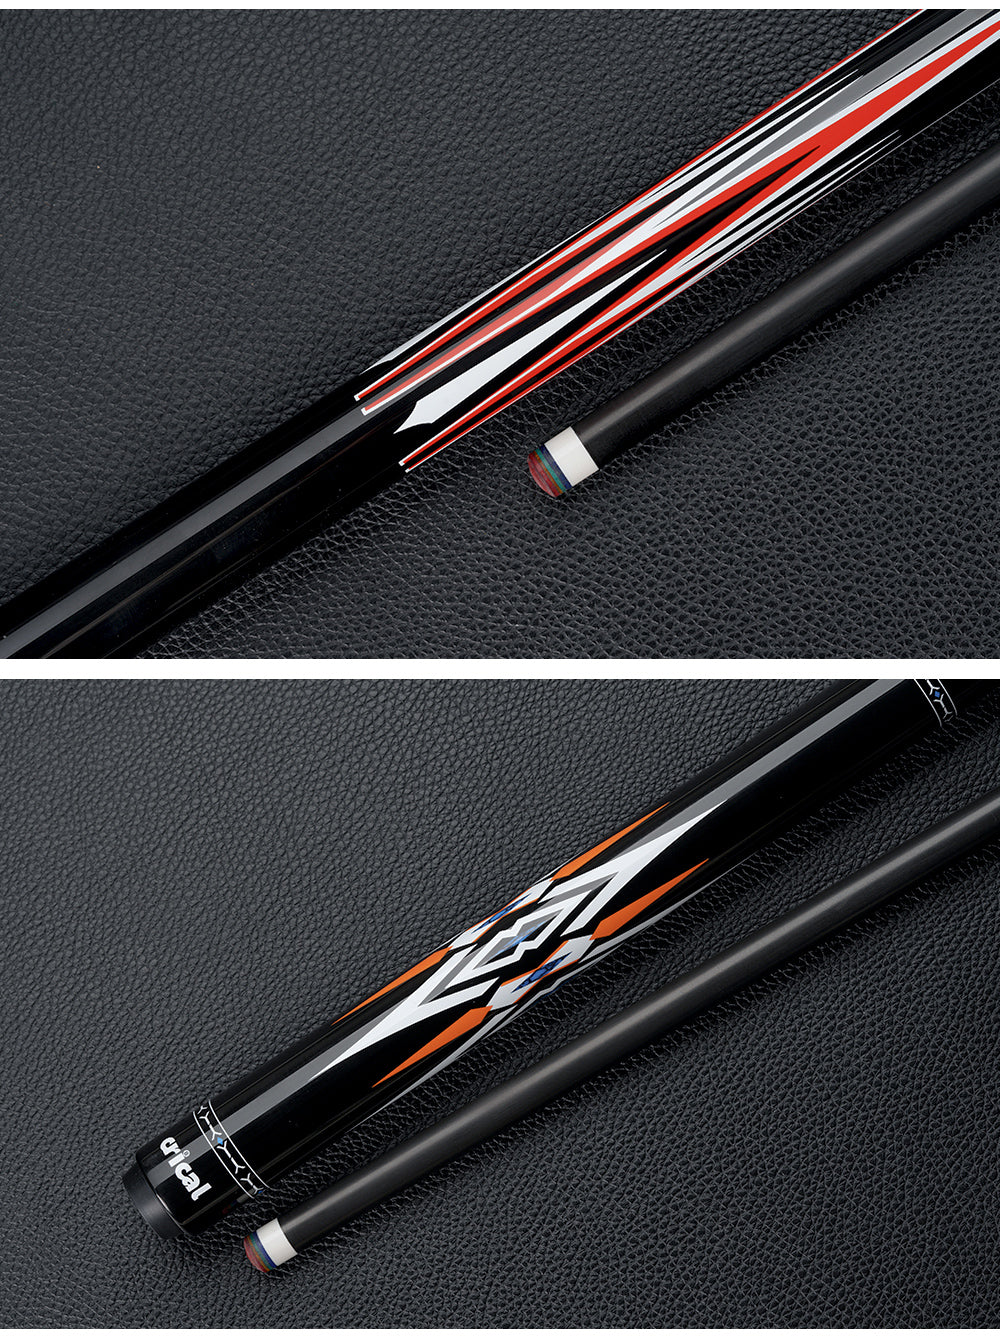 CRICAL XINYI Carbon Fiber Pool Cue Stick 58" Billiard Cue Sticks Professional Low Deflection Pool Sticks with 3/8 * 8 Pin Joint and 12